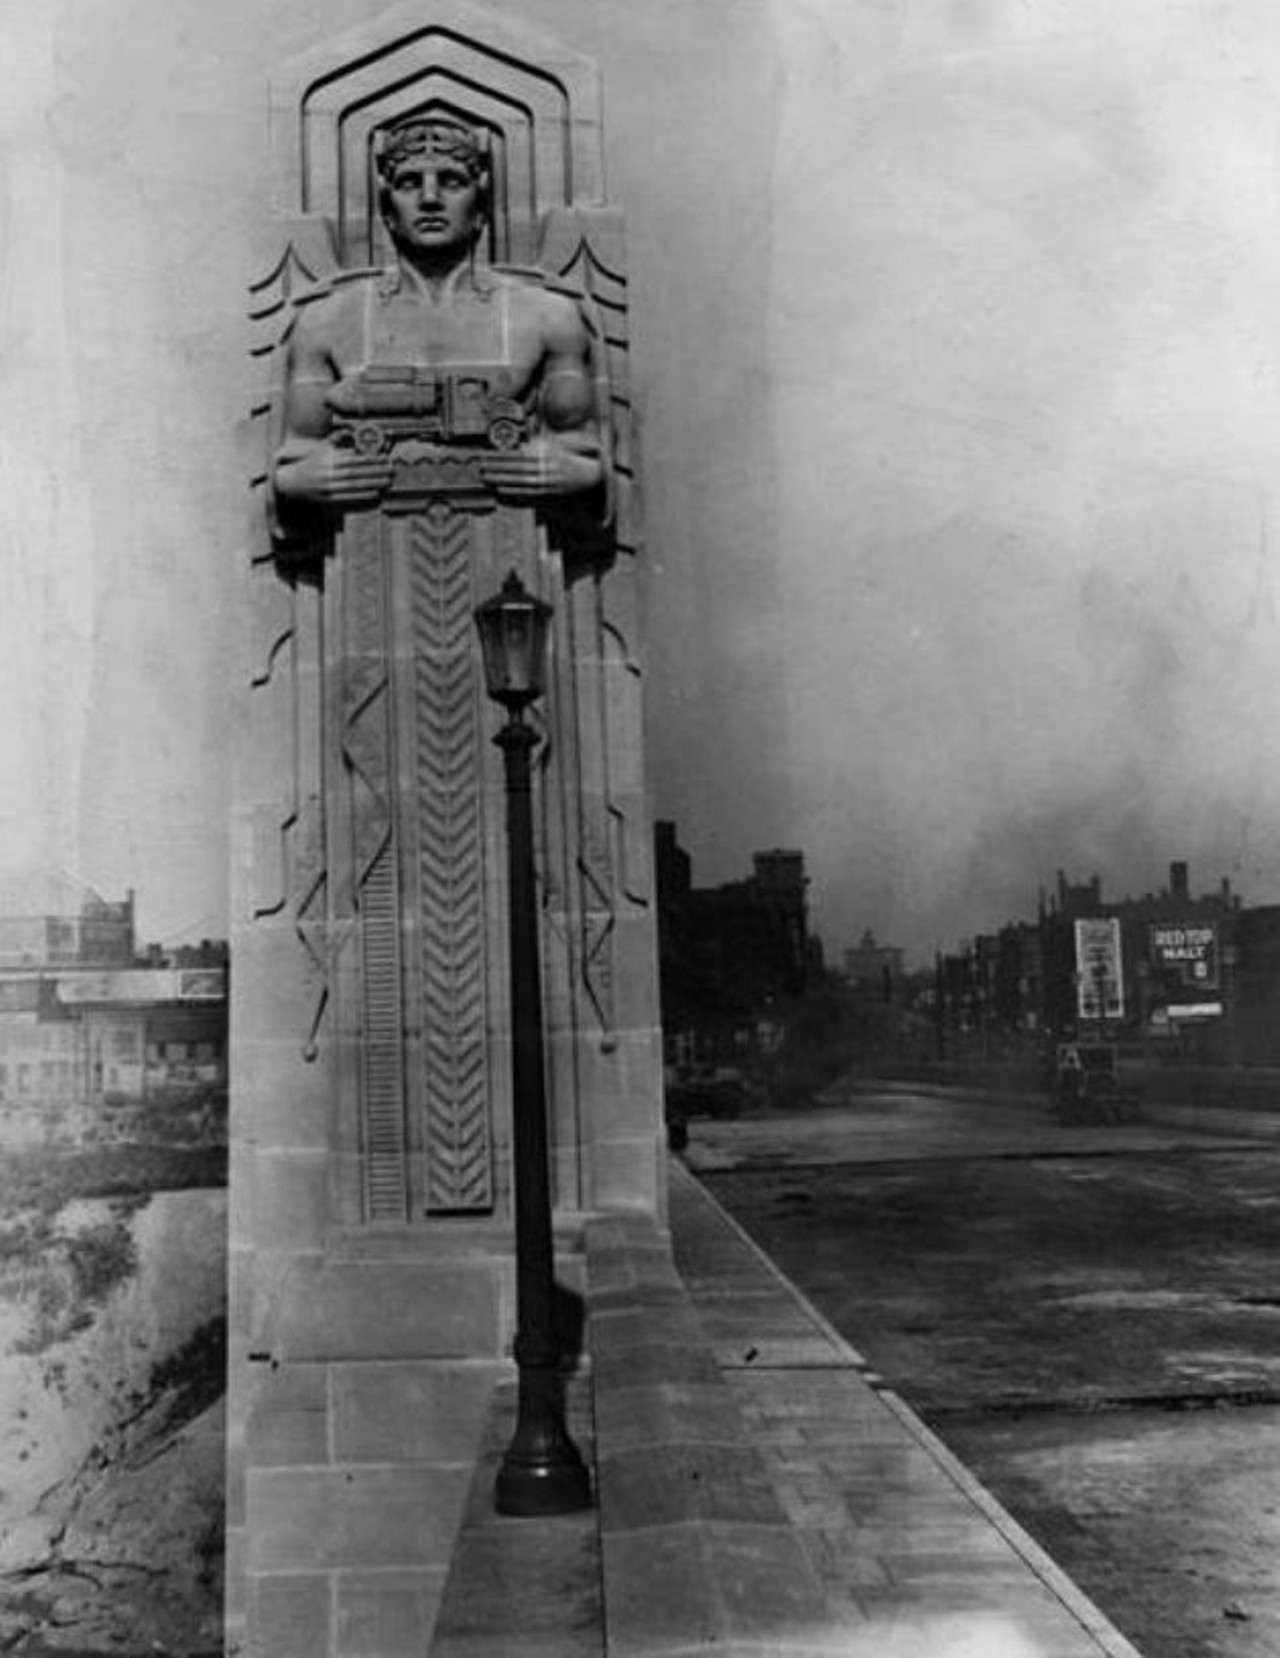 They are indeed the Guardians of Traffic And not the Guardians of Transportation. Though they've also been referred to as The Lords of Transportation in earlier years by some. 
1932 Guardian photo via the Cleveland Memory Project